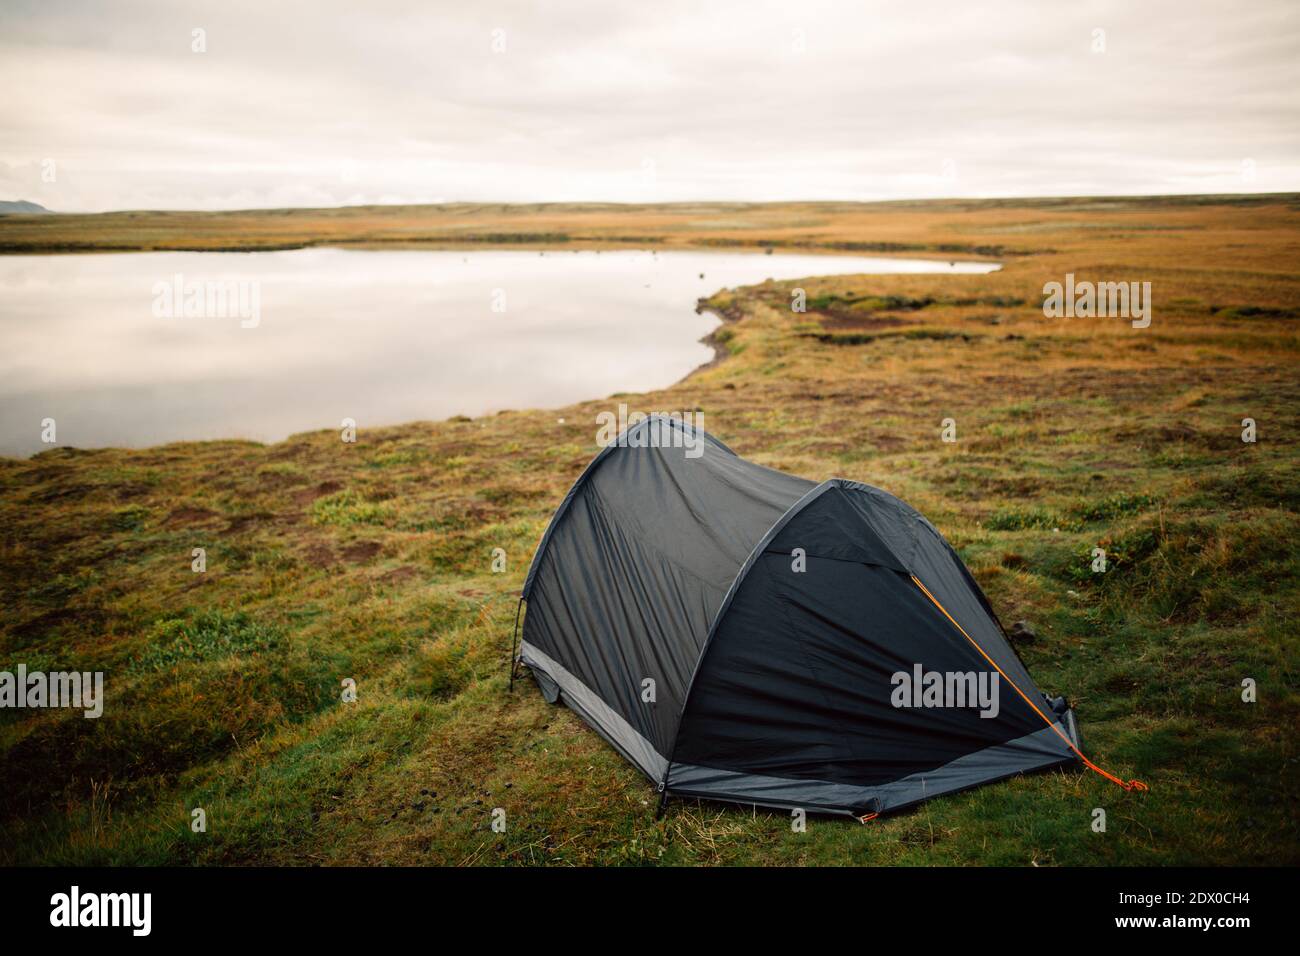 Setting up tent.Camping outside on a beautiful meadow near the lake.Road trip camping in Iceland.Morning scene.Sleeping in tents.Hikers lodging for th Stock Photo